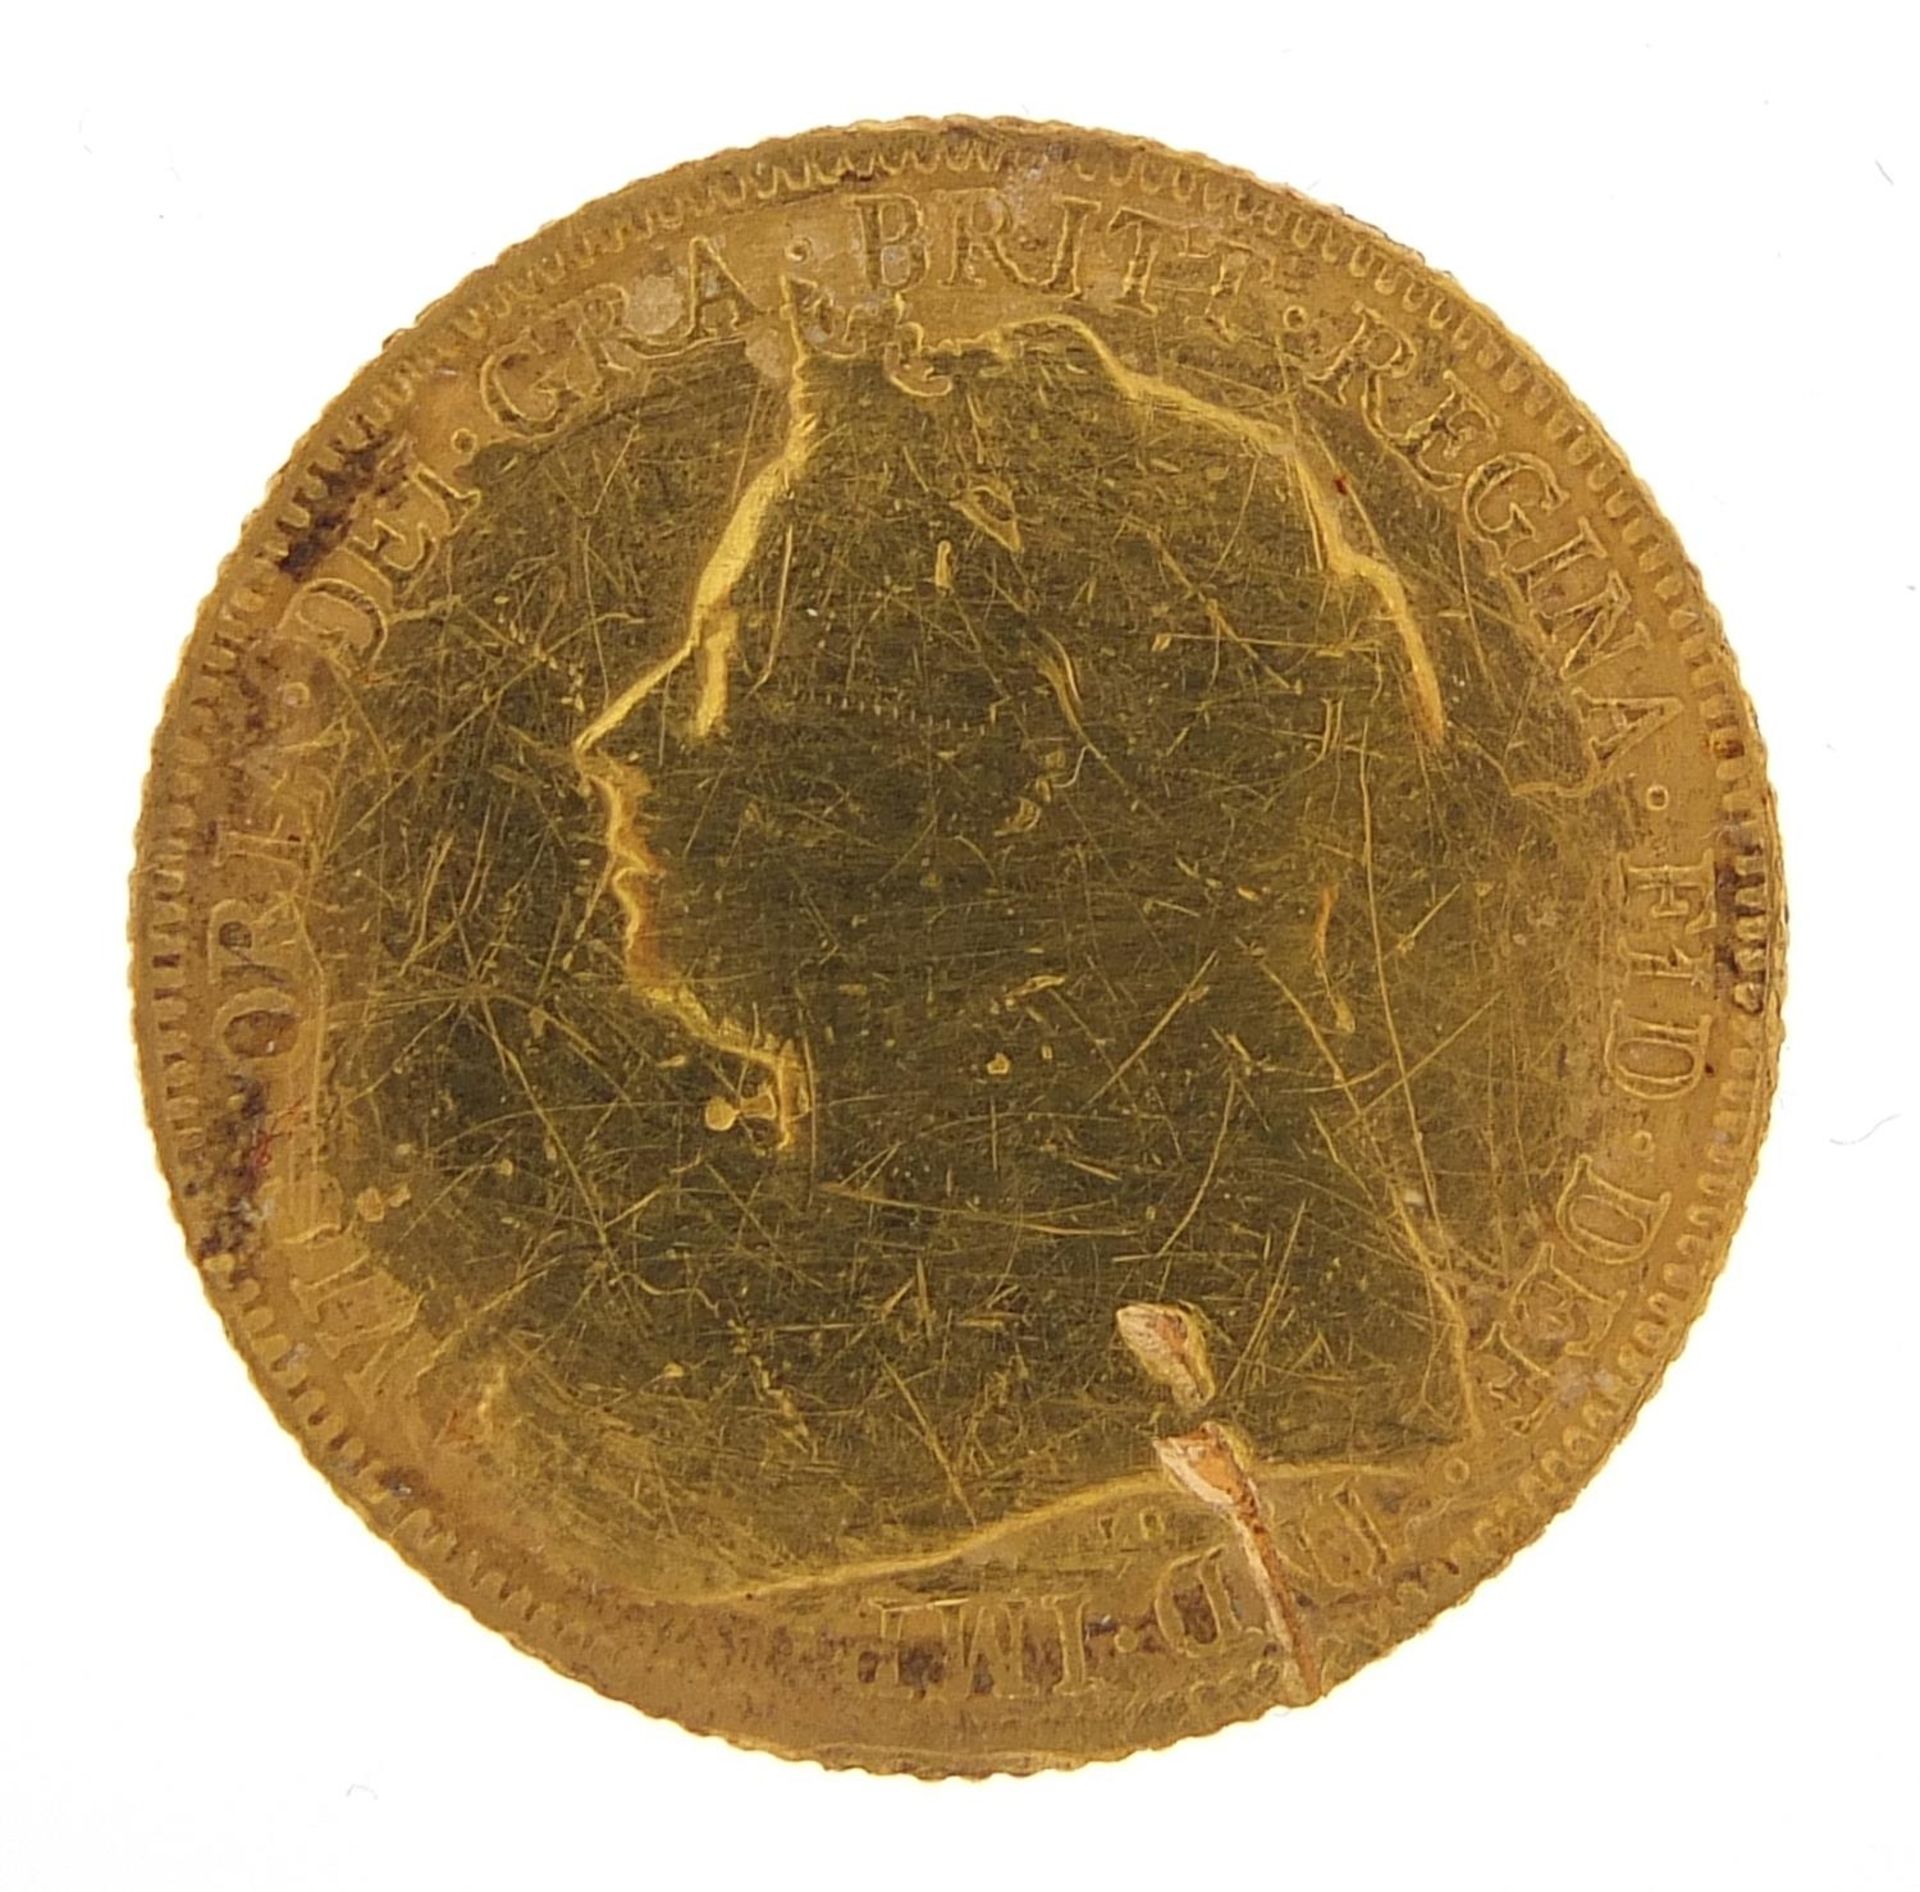 Queen Victoria 1899 gold sovereign - this lot is sold without buyer?s premium - Image 2 of 3